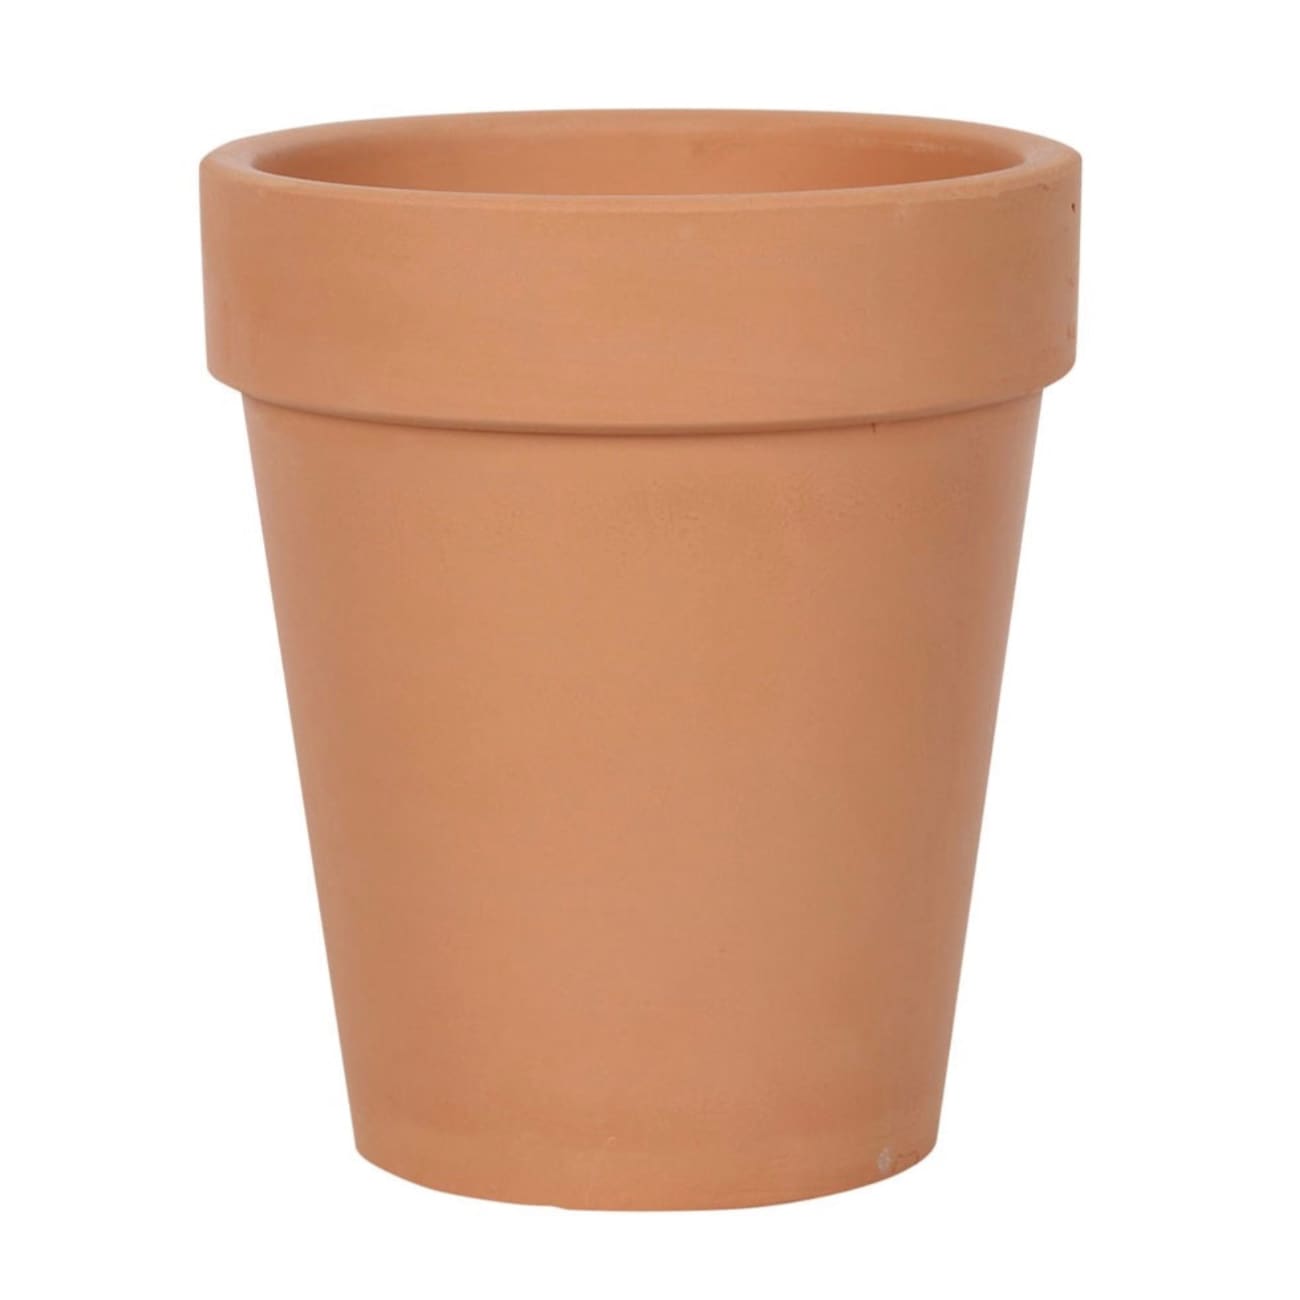 LOVE GROWS HERE TERRACOTTA PLANT POT - LOVE GROWS HERE